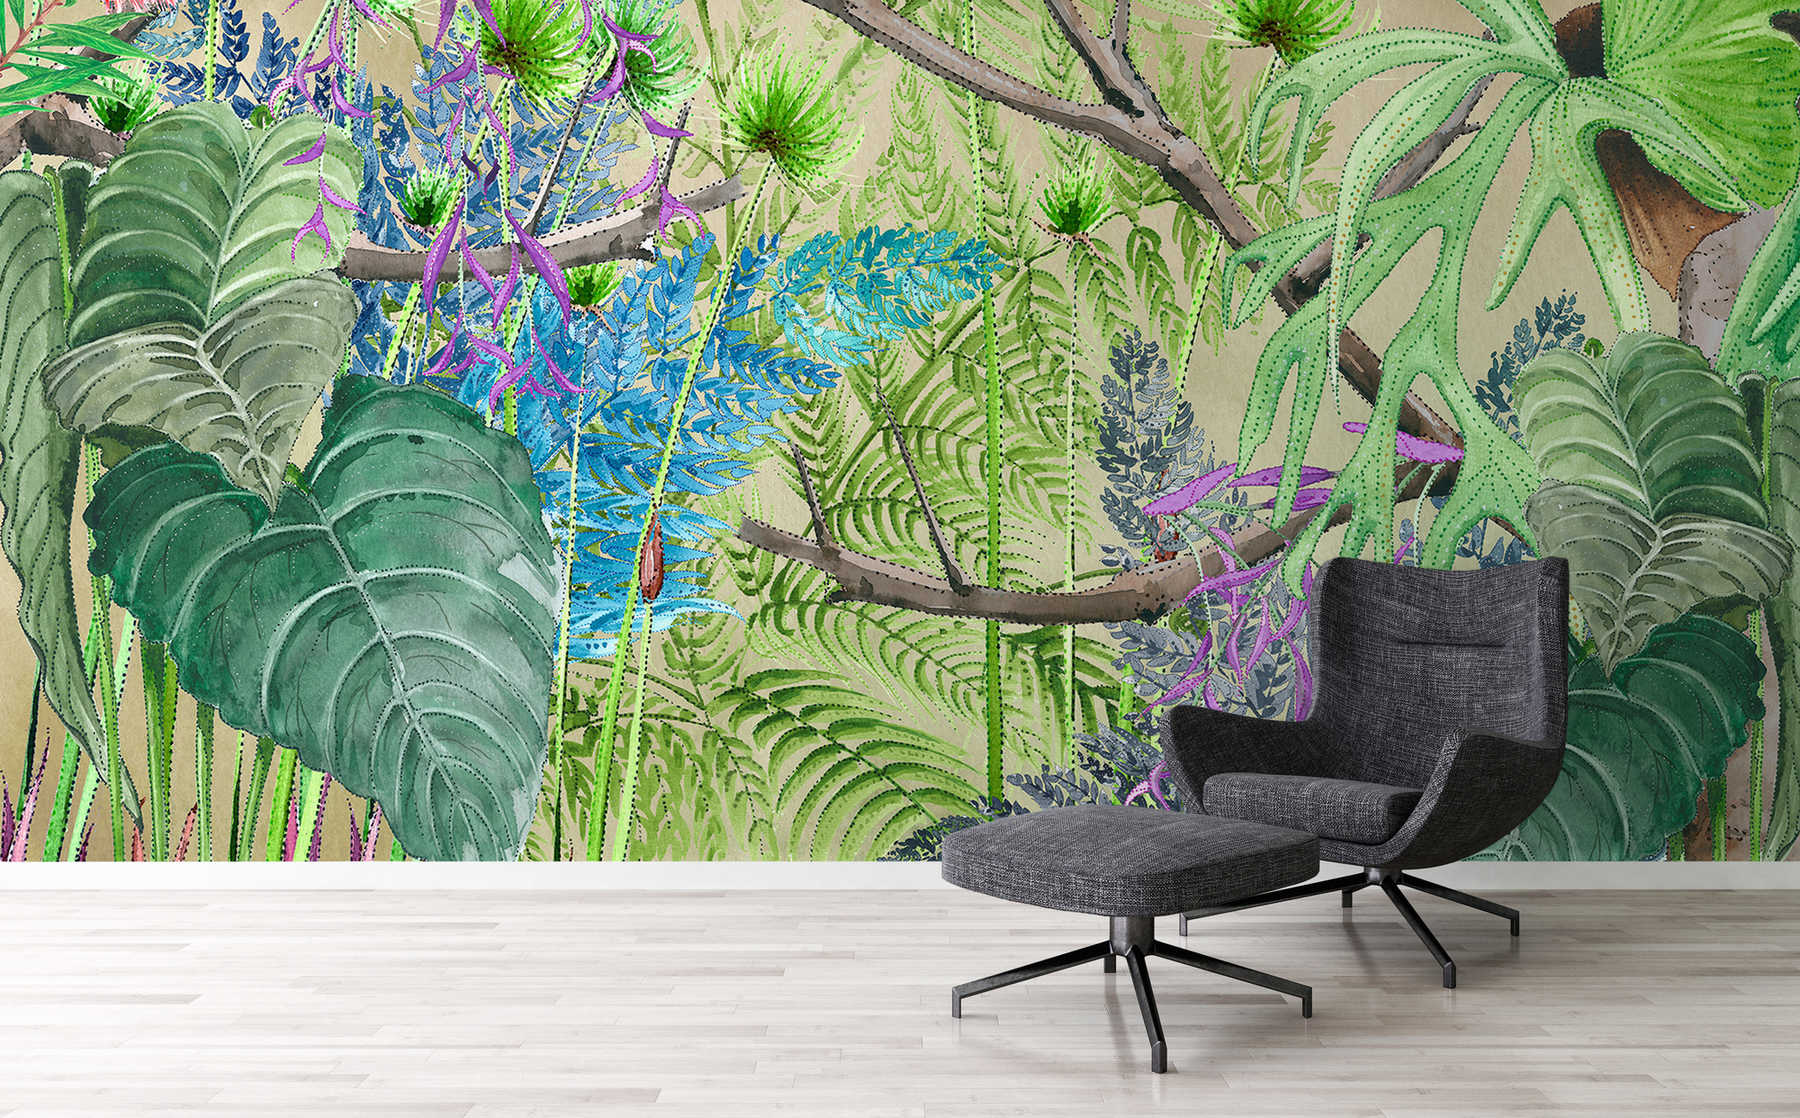             Jungle mural with flowers in blue and green on premium smooth vinyl
        